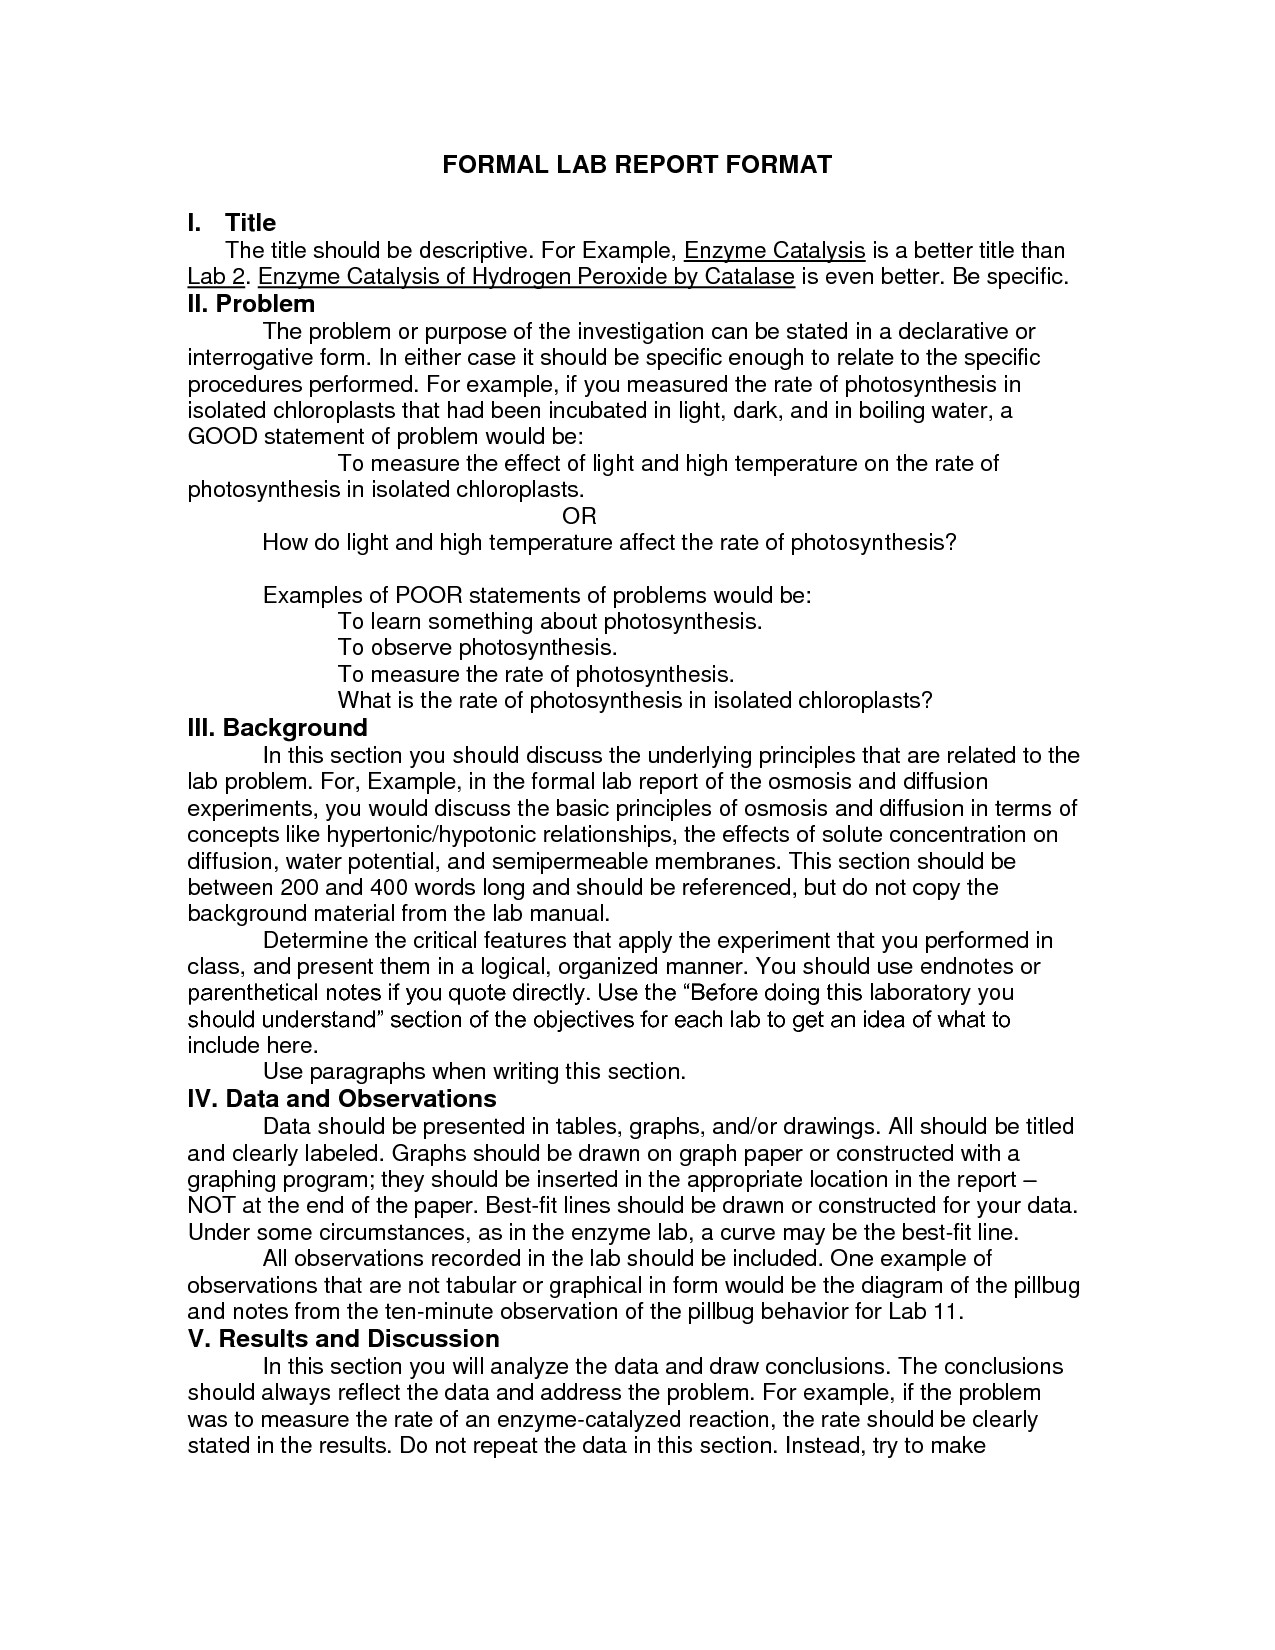 Formal Lab Report Template Another formal Lab Report format